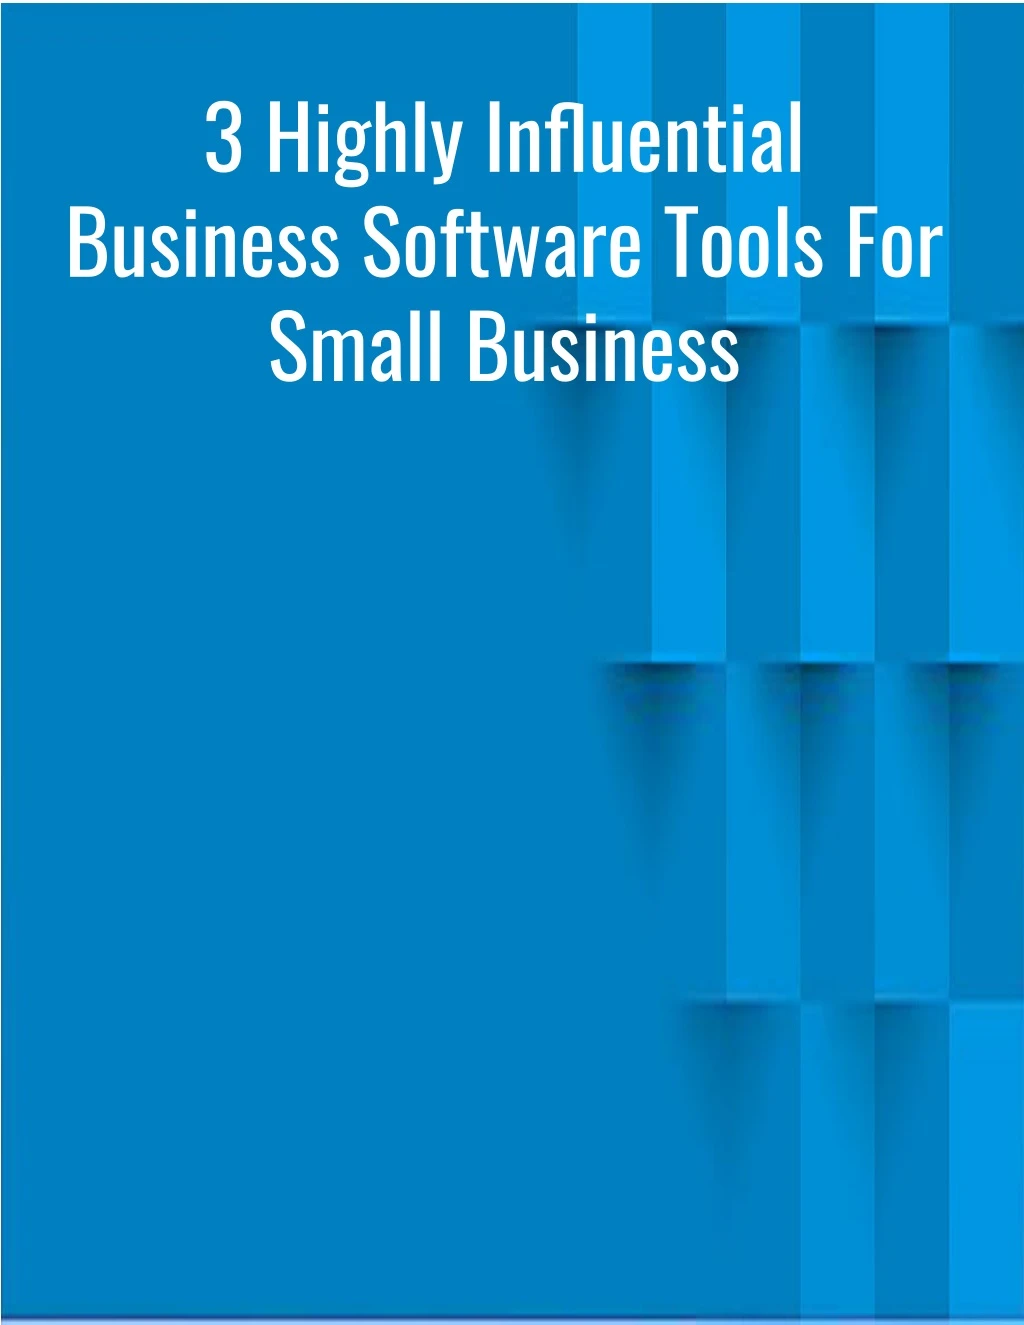 3 highly influential business software tools